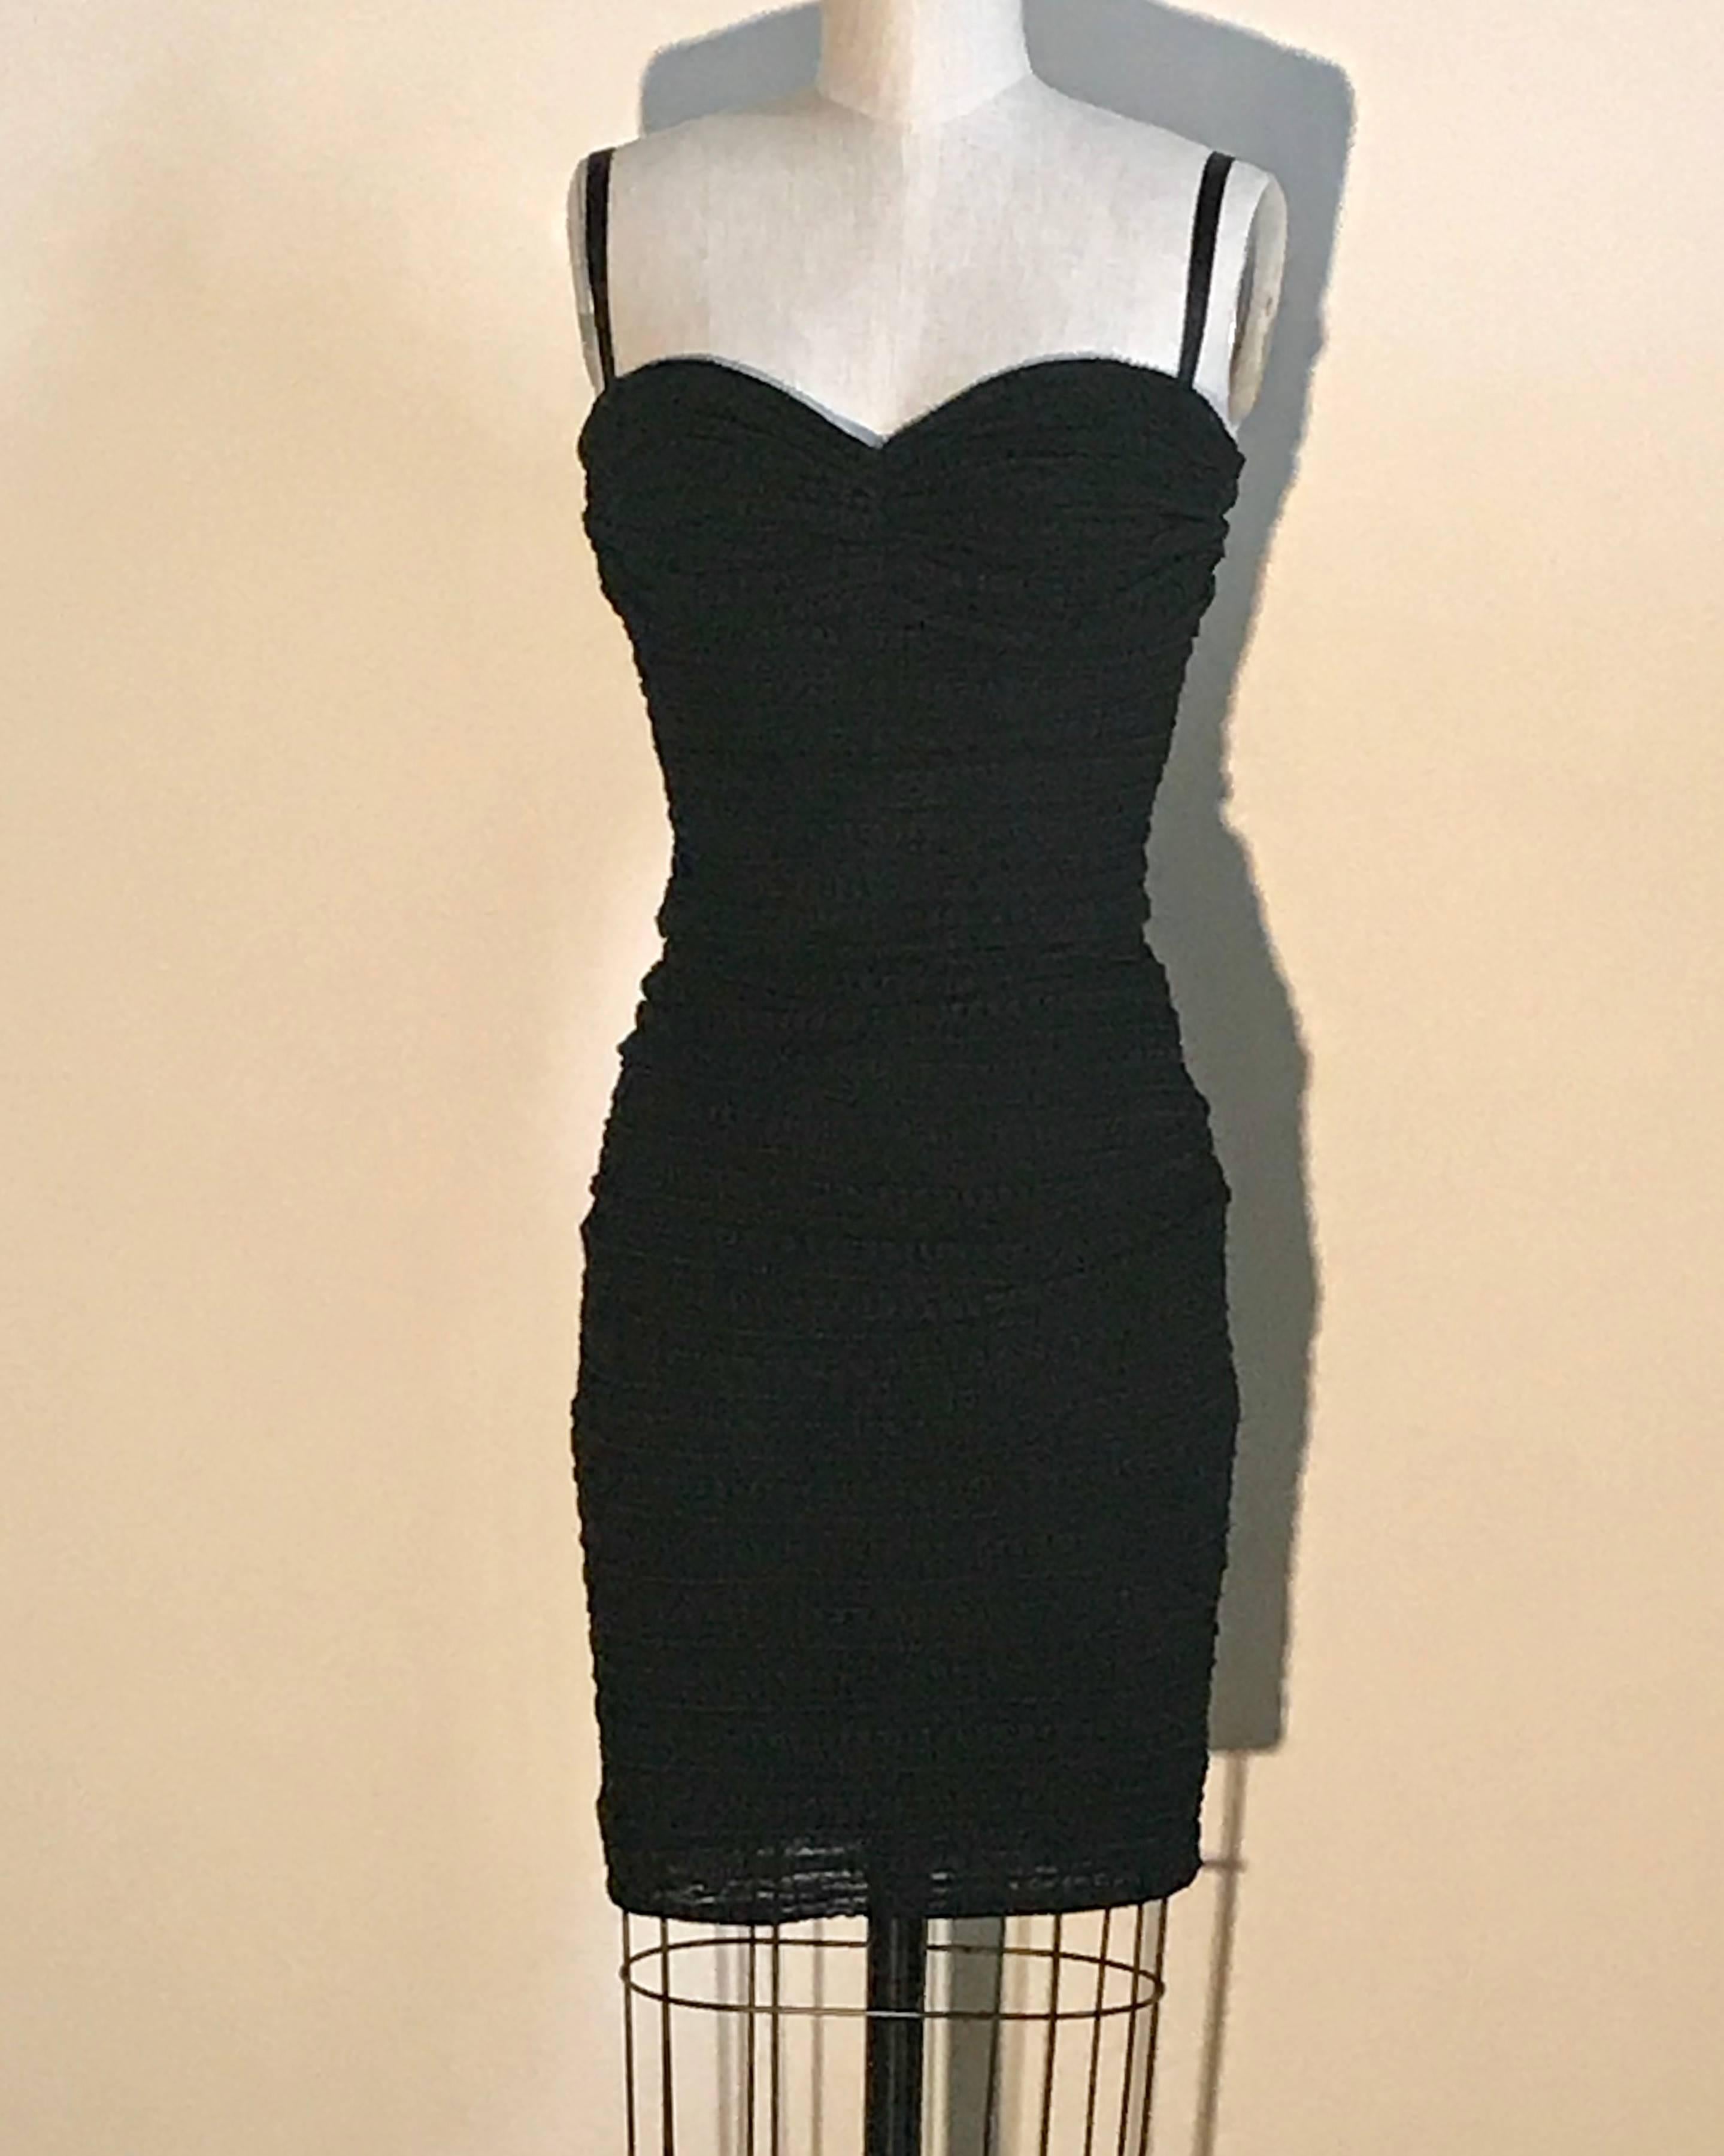 Dolce & Gabbana sexy little black dress in an amazing textured stretch fabric with slight draping/ruching at bodice. Can be worn with ribbon straps, or they can be tucked in and it can be worn strapless. Built in bustier with boning and cups at